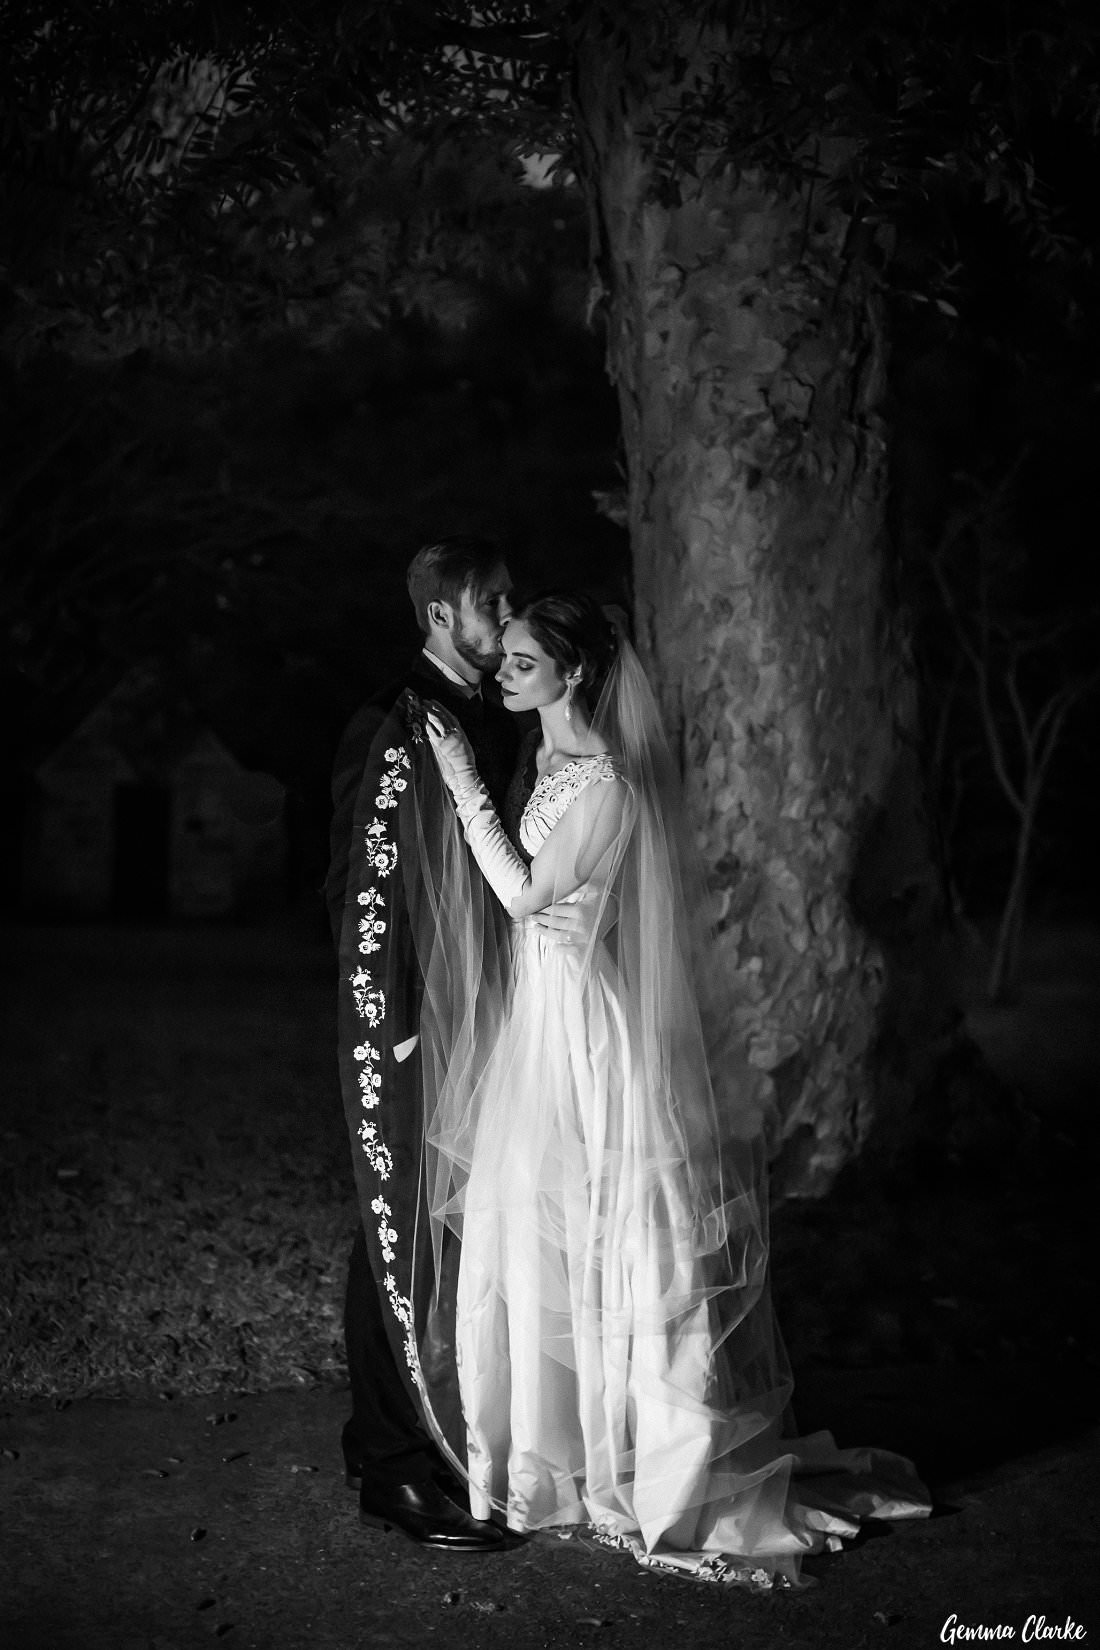 The only time for photos together was at night and these bride and groom portraits were so romantic and intimate at their Hunters Hill Wedding